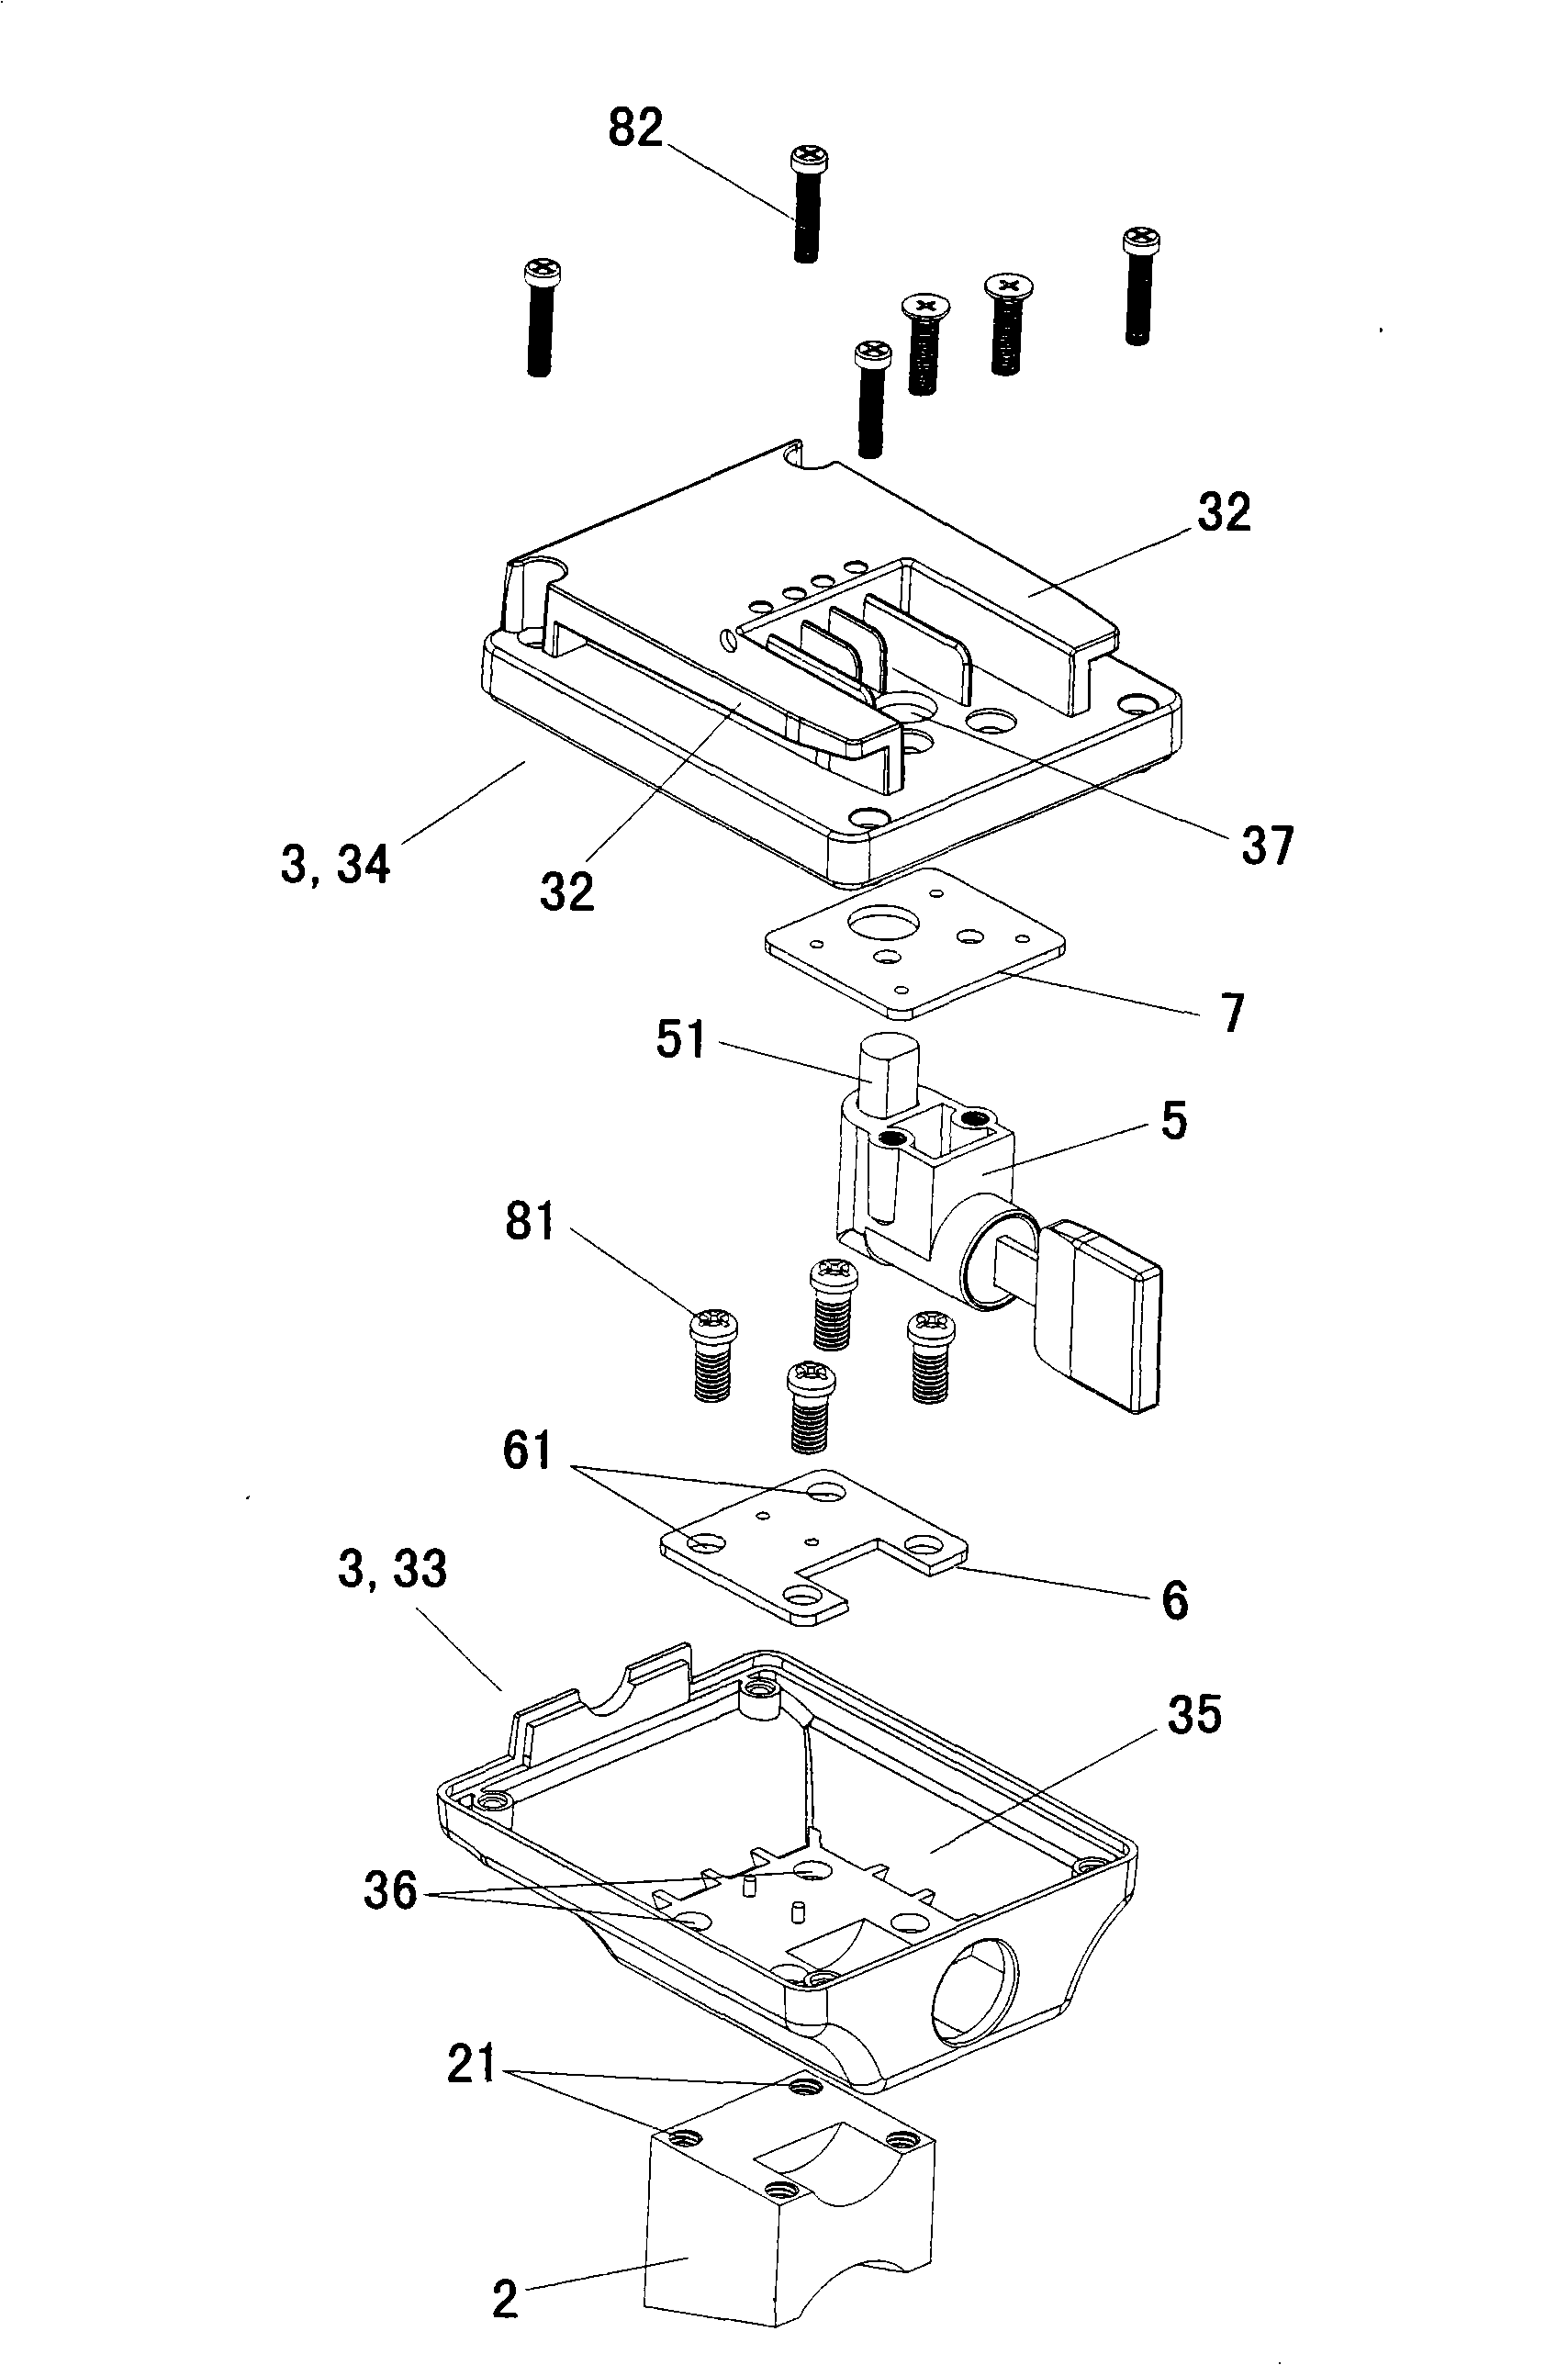 Power battery pack device convenient for changing installation position